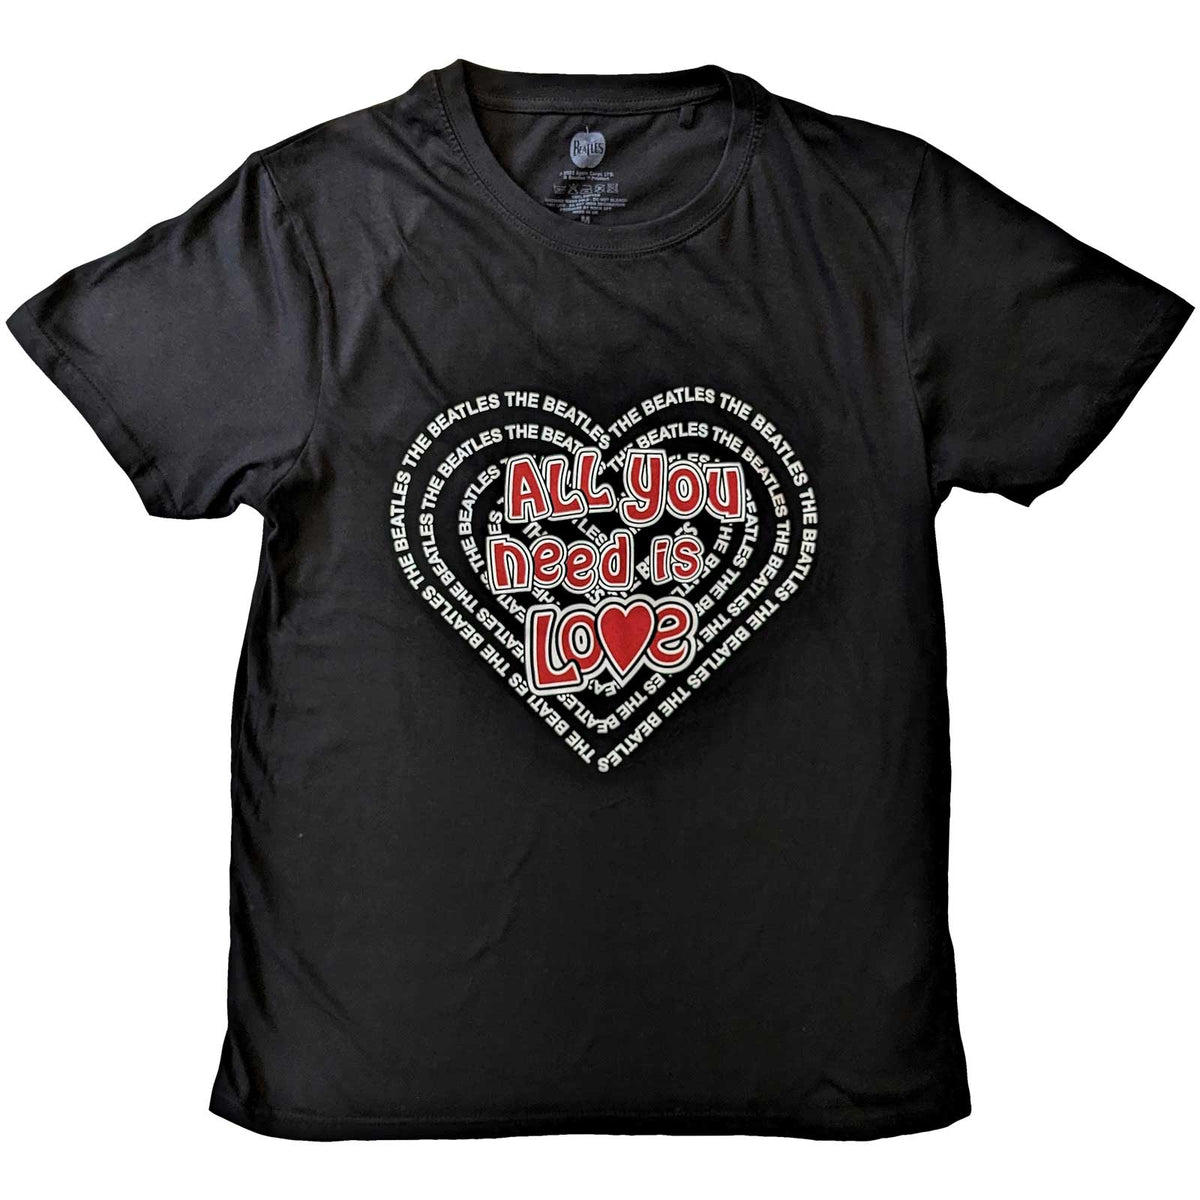 The Beatles T-Shirt - All You Need is Love Heart - Black Unisex Official Licensed Design